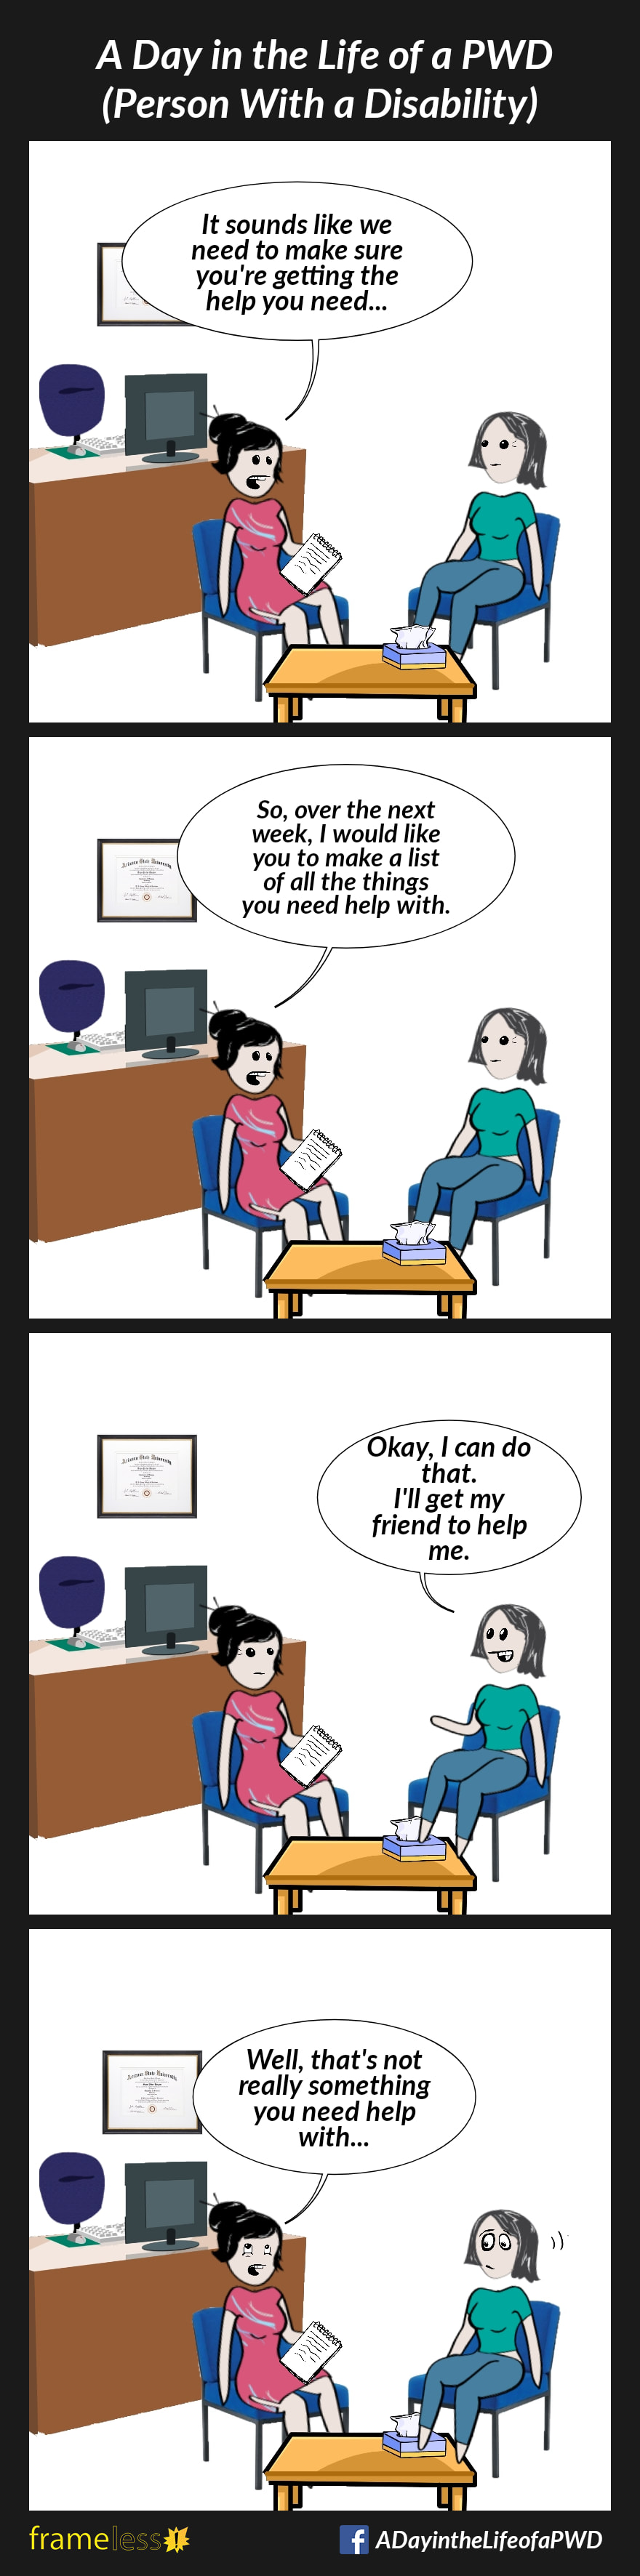 COMIC STRIP 
A Day in the Life of a PWD (Person With a Disability) 

Frame 1:
A woman is at a therapist's appointment. 
THERAPIST: It sounds like we need to make sure you're getting the help you beed...

Frame 2:
THERAPIST: So, over the next week, I'd like you to make a lust of all the things you need help with.

Frame 3:
WOMAN: Okay, I can do that. I'll get my friend to help me.

Frame 4:
THERAPIST: Well, that's not really something you need help with...